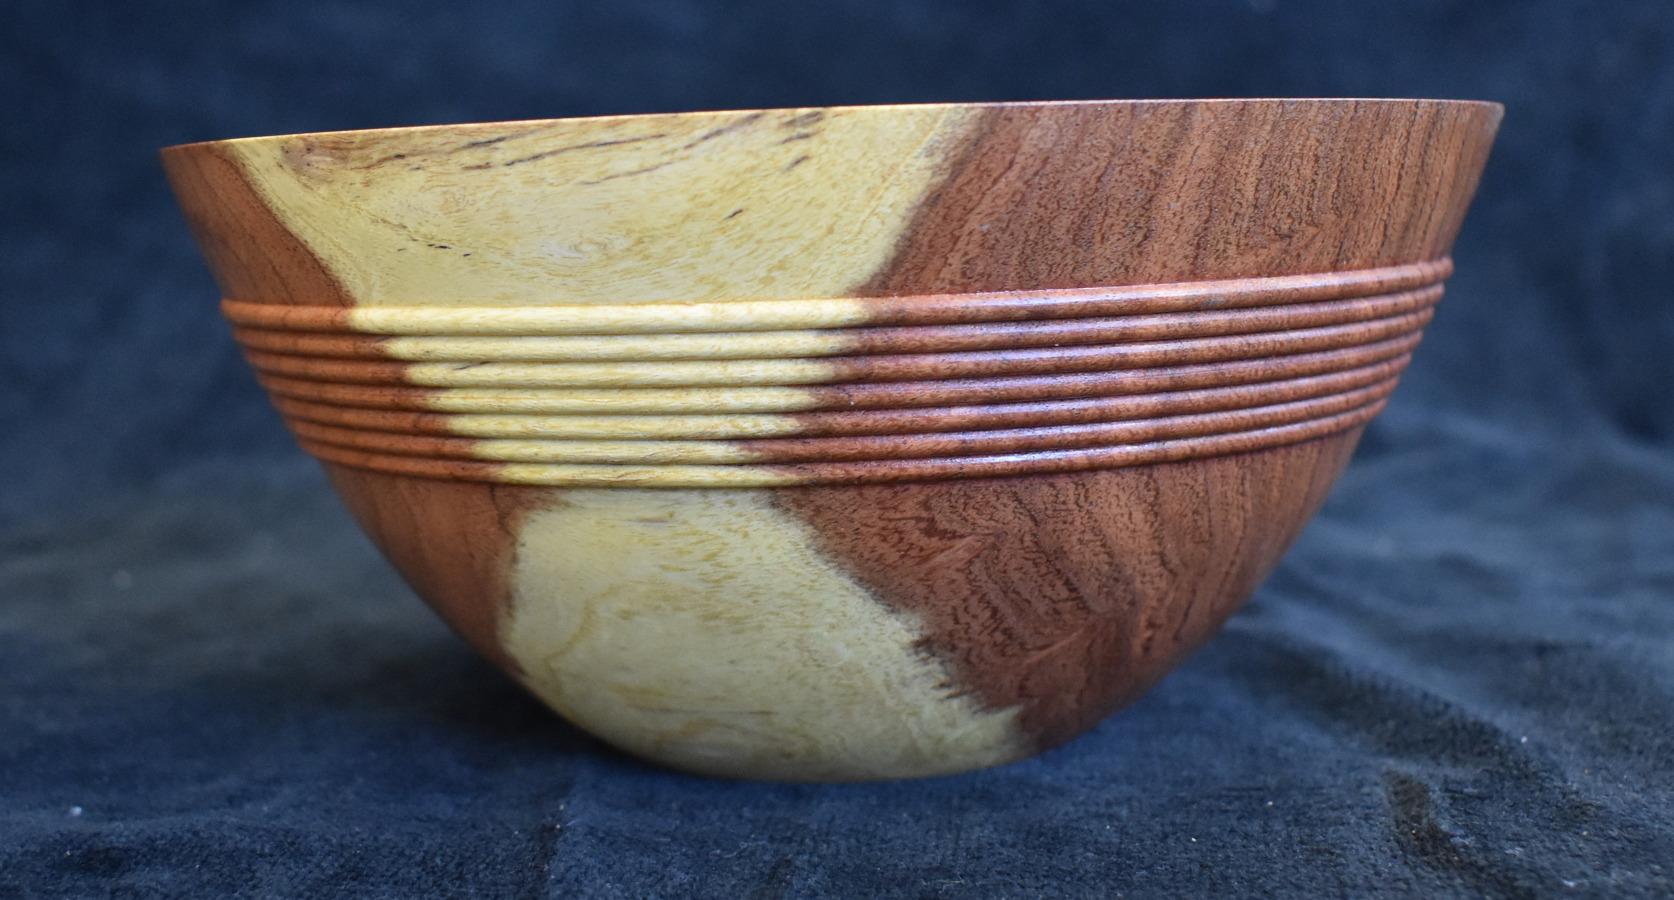 Carmie
Born 1958
Mesquite Bowl with Beads
7